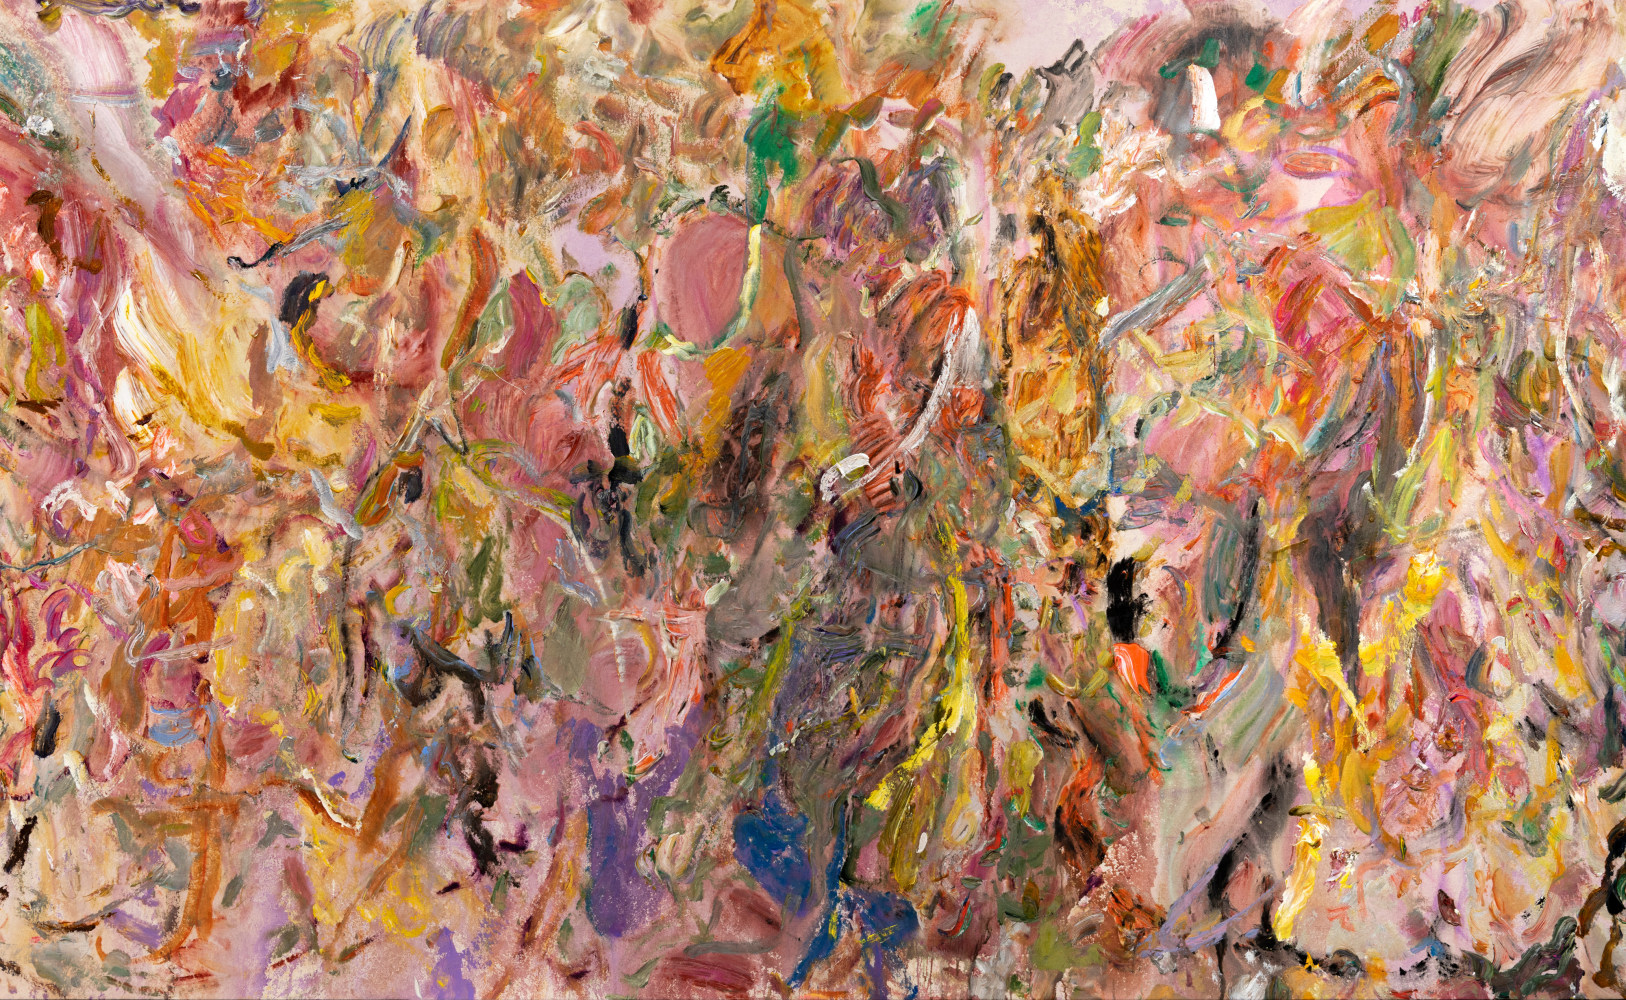 LARRY POONS (American b. 1937)

Prancing &amp;amp; Dancing

2021

Acrylic on canvas

55 1/2 x 90 1/2 inches

141 x 229.9cm